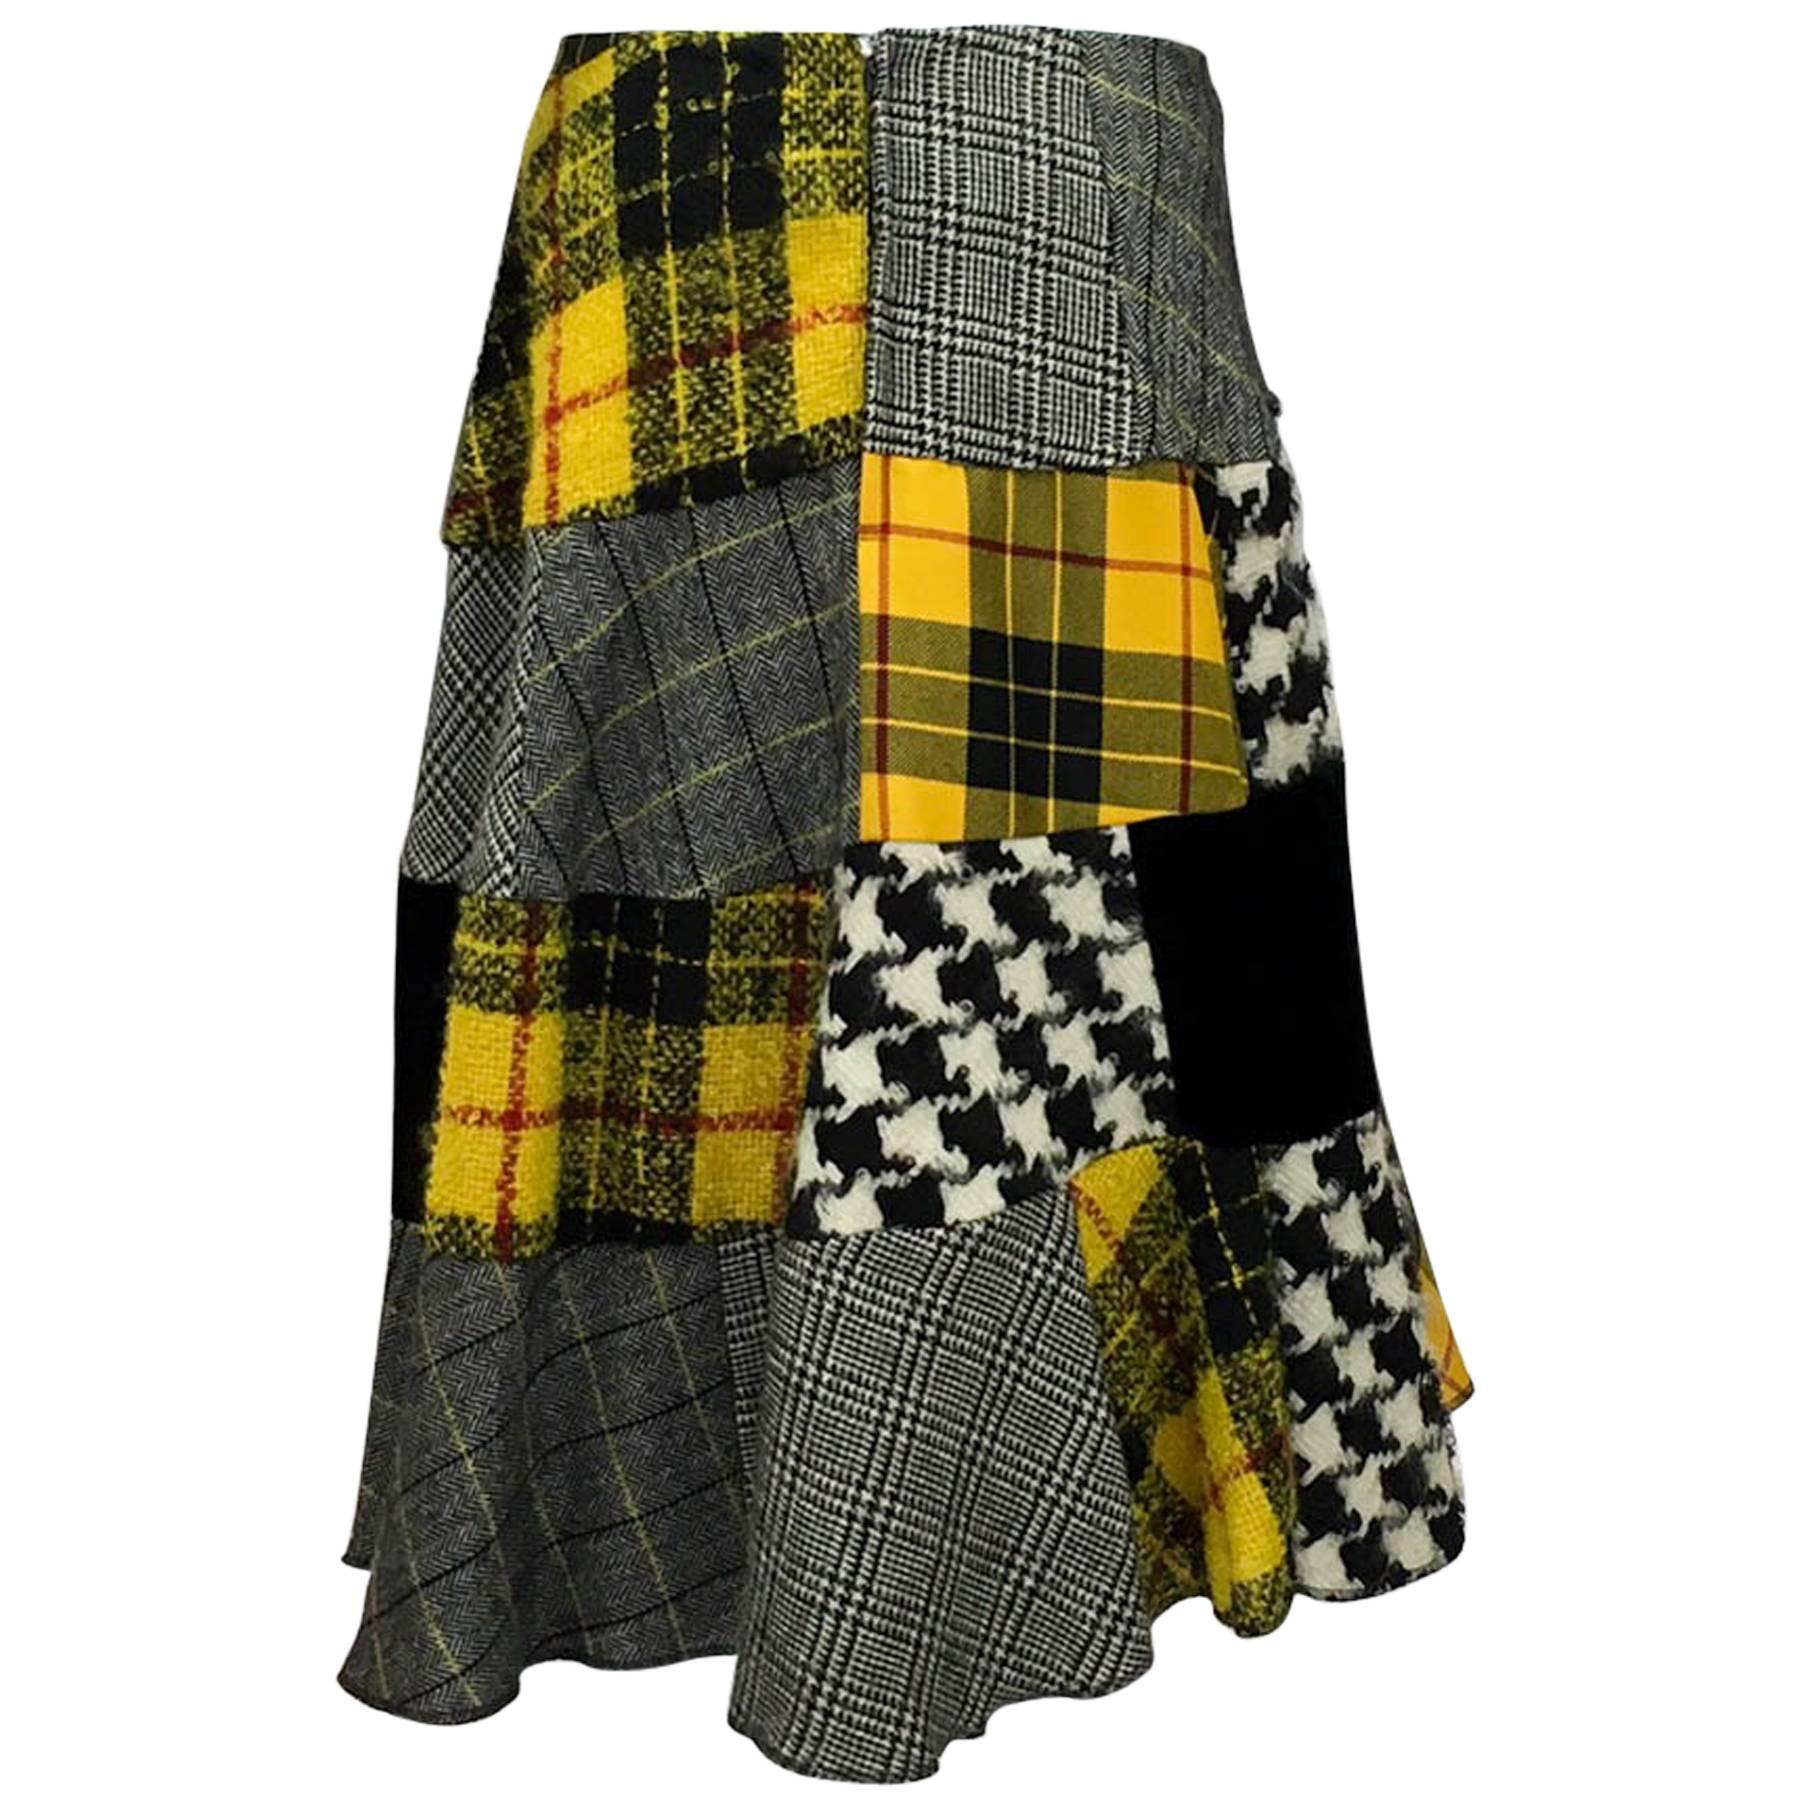 Rare Vintage Comme des Garcons Patchwork Asymmetrical Skirt. Fabulous skirt by Comme des Garcons featuring patch work in plaids, tweeds, mohair and black velvet. This asymmetrical skirt flares out creating a very flattering silhouette. Back zipper.